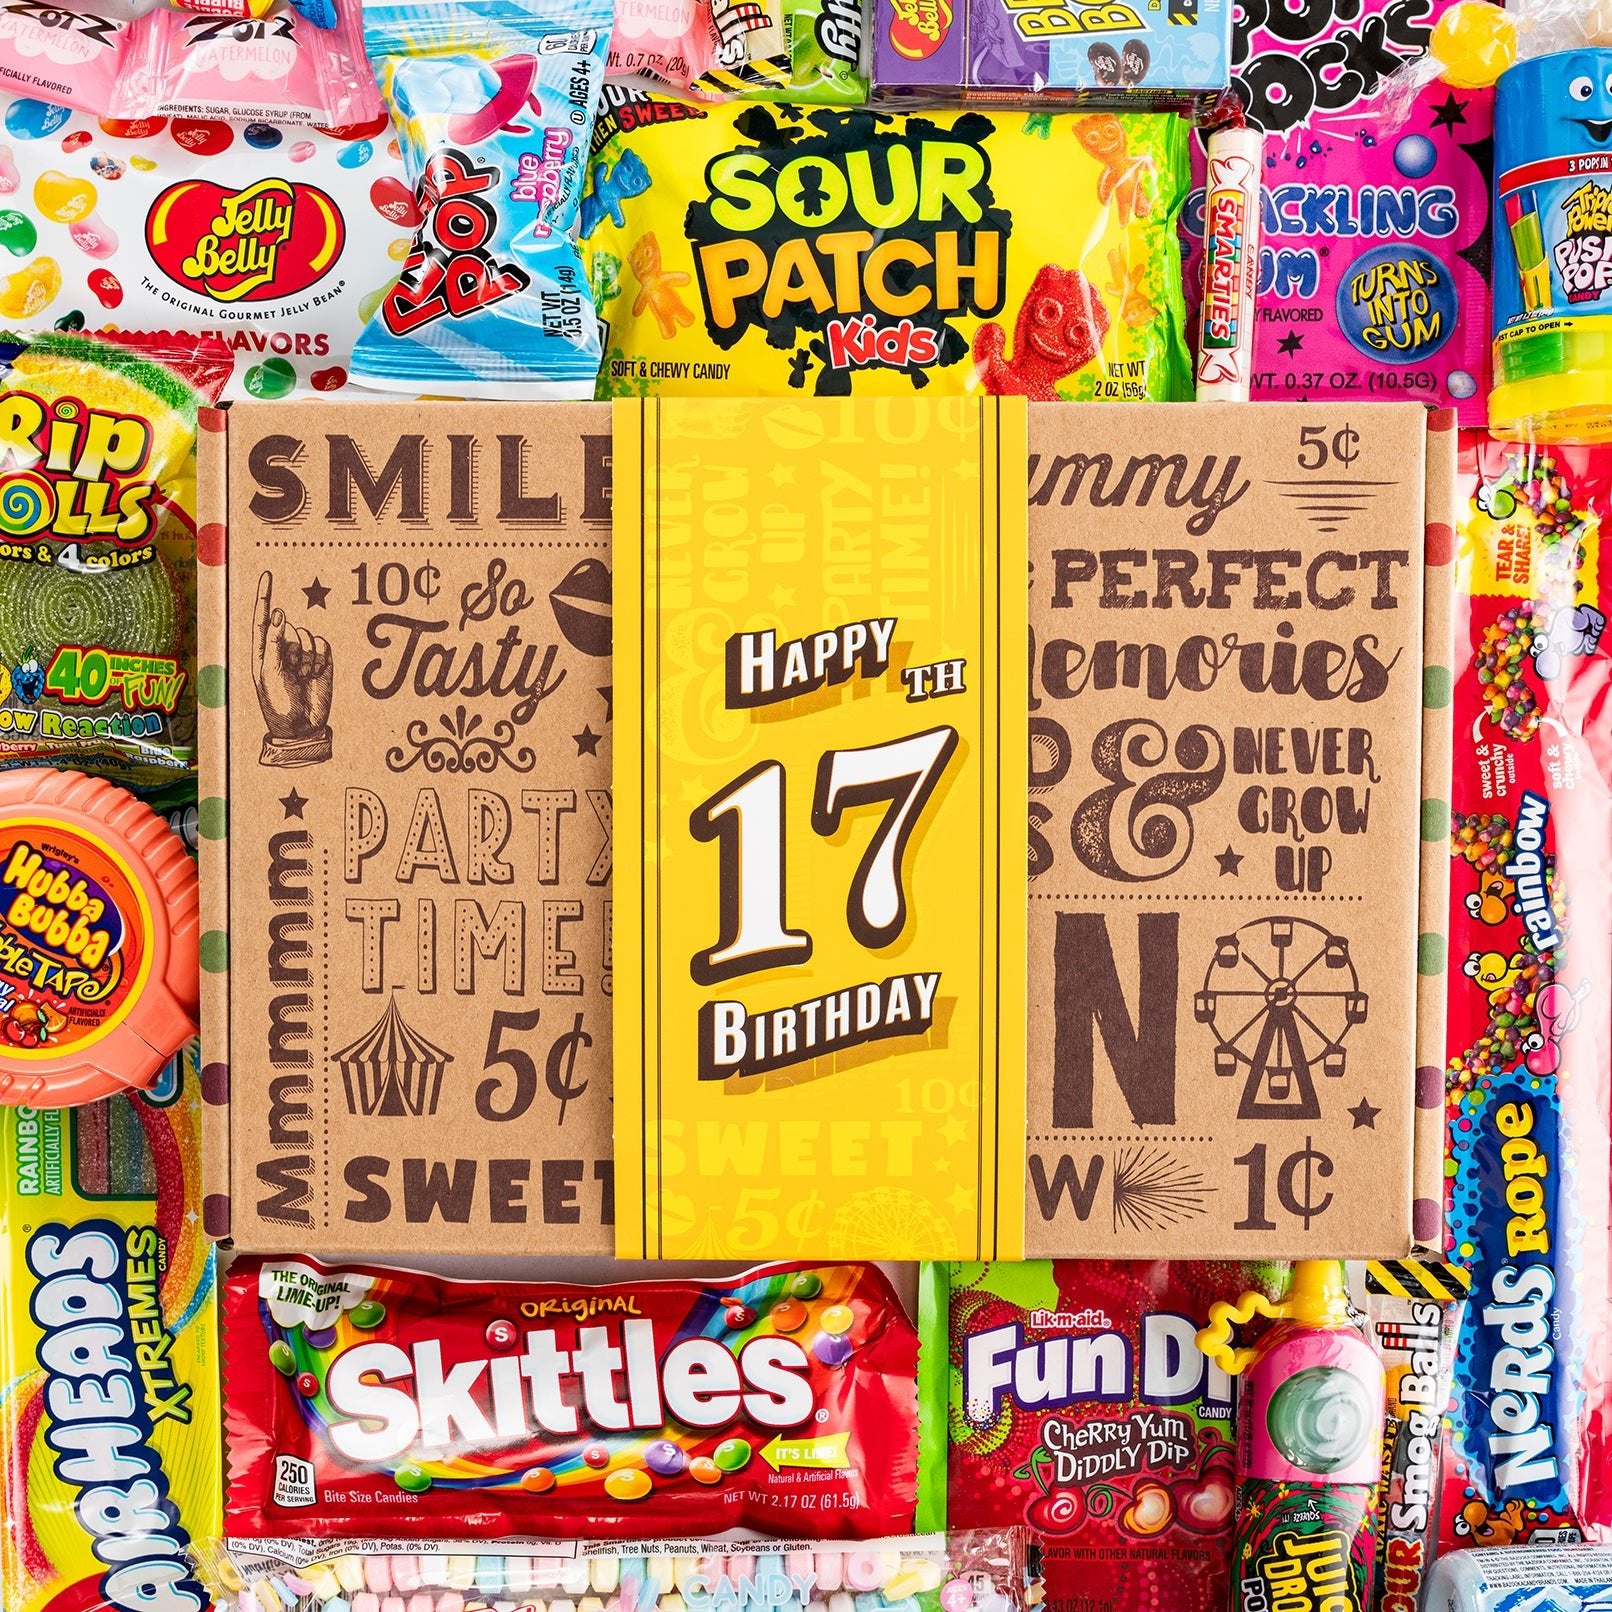 17th Birthday Retro Candy Gift - Vintage Candy Co.